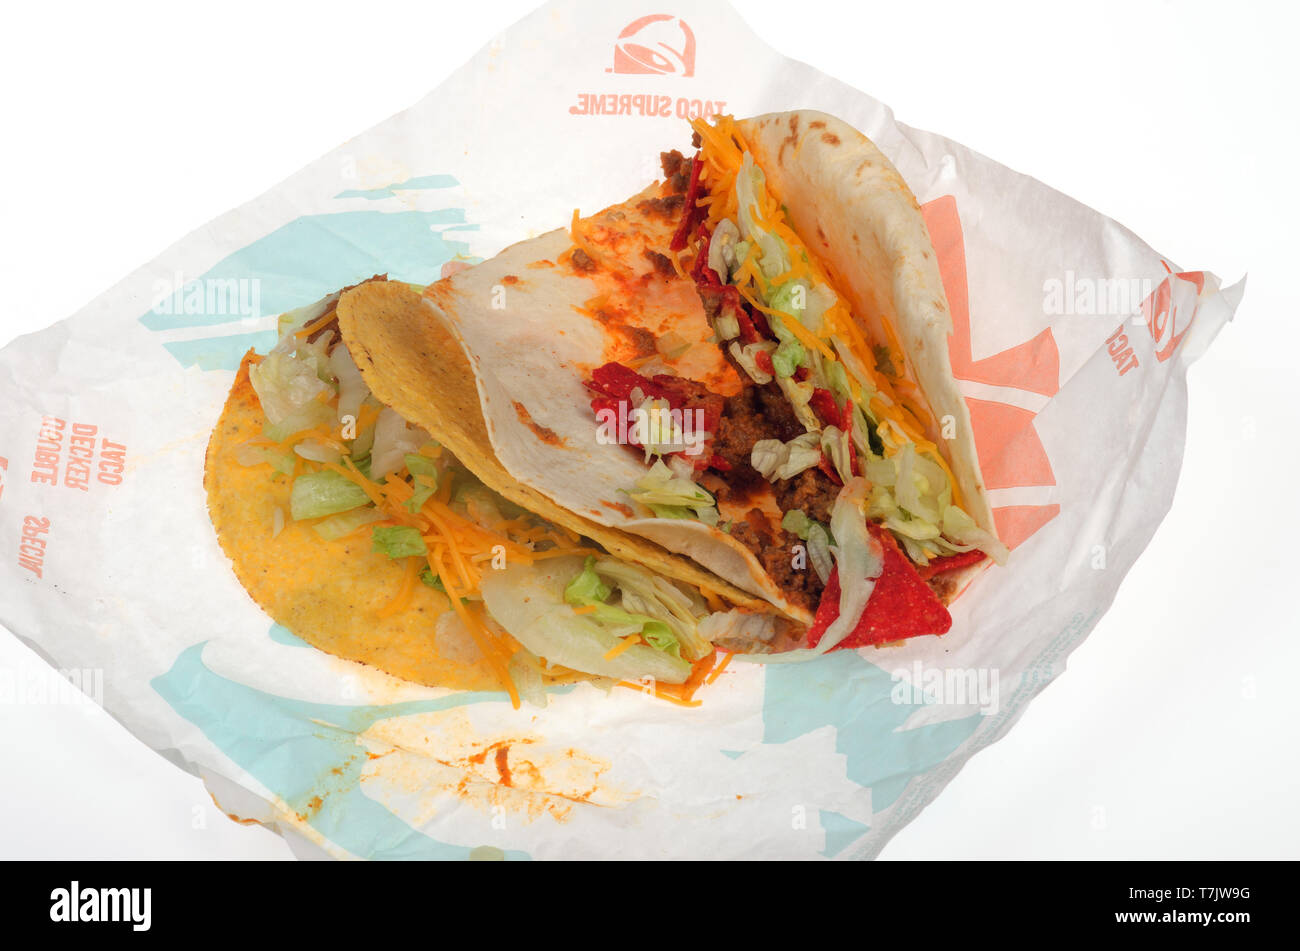 2 Taco Bell tacos on wrapper, 1 Crunchy Taco hard shell and 1 Loaded Nacho Taco spicy soft shell on wrapper Stock Photo